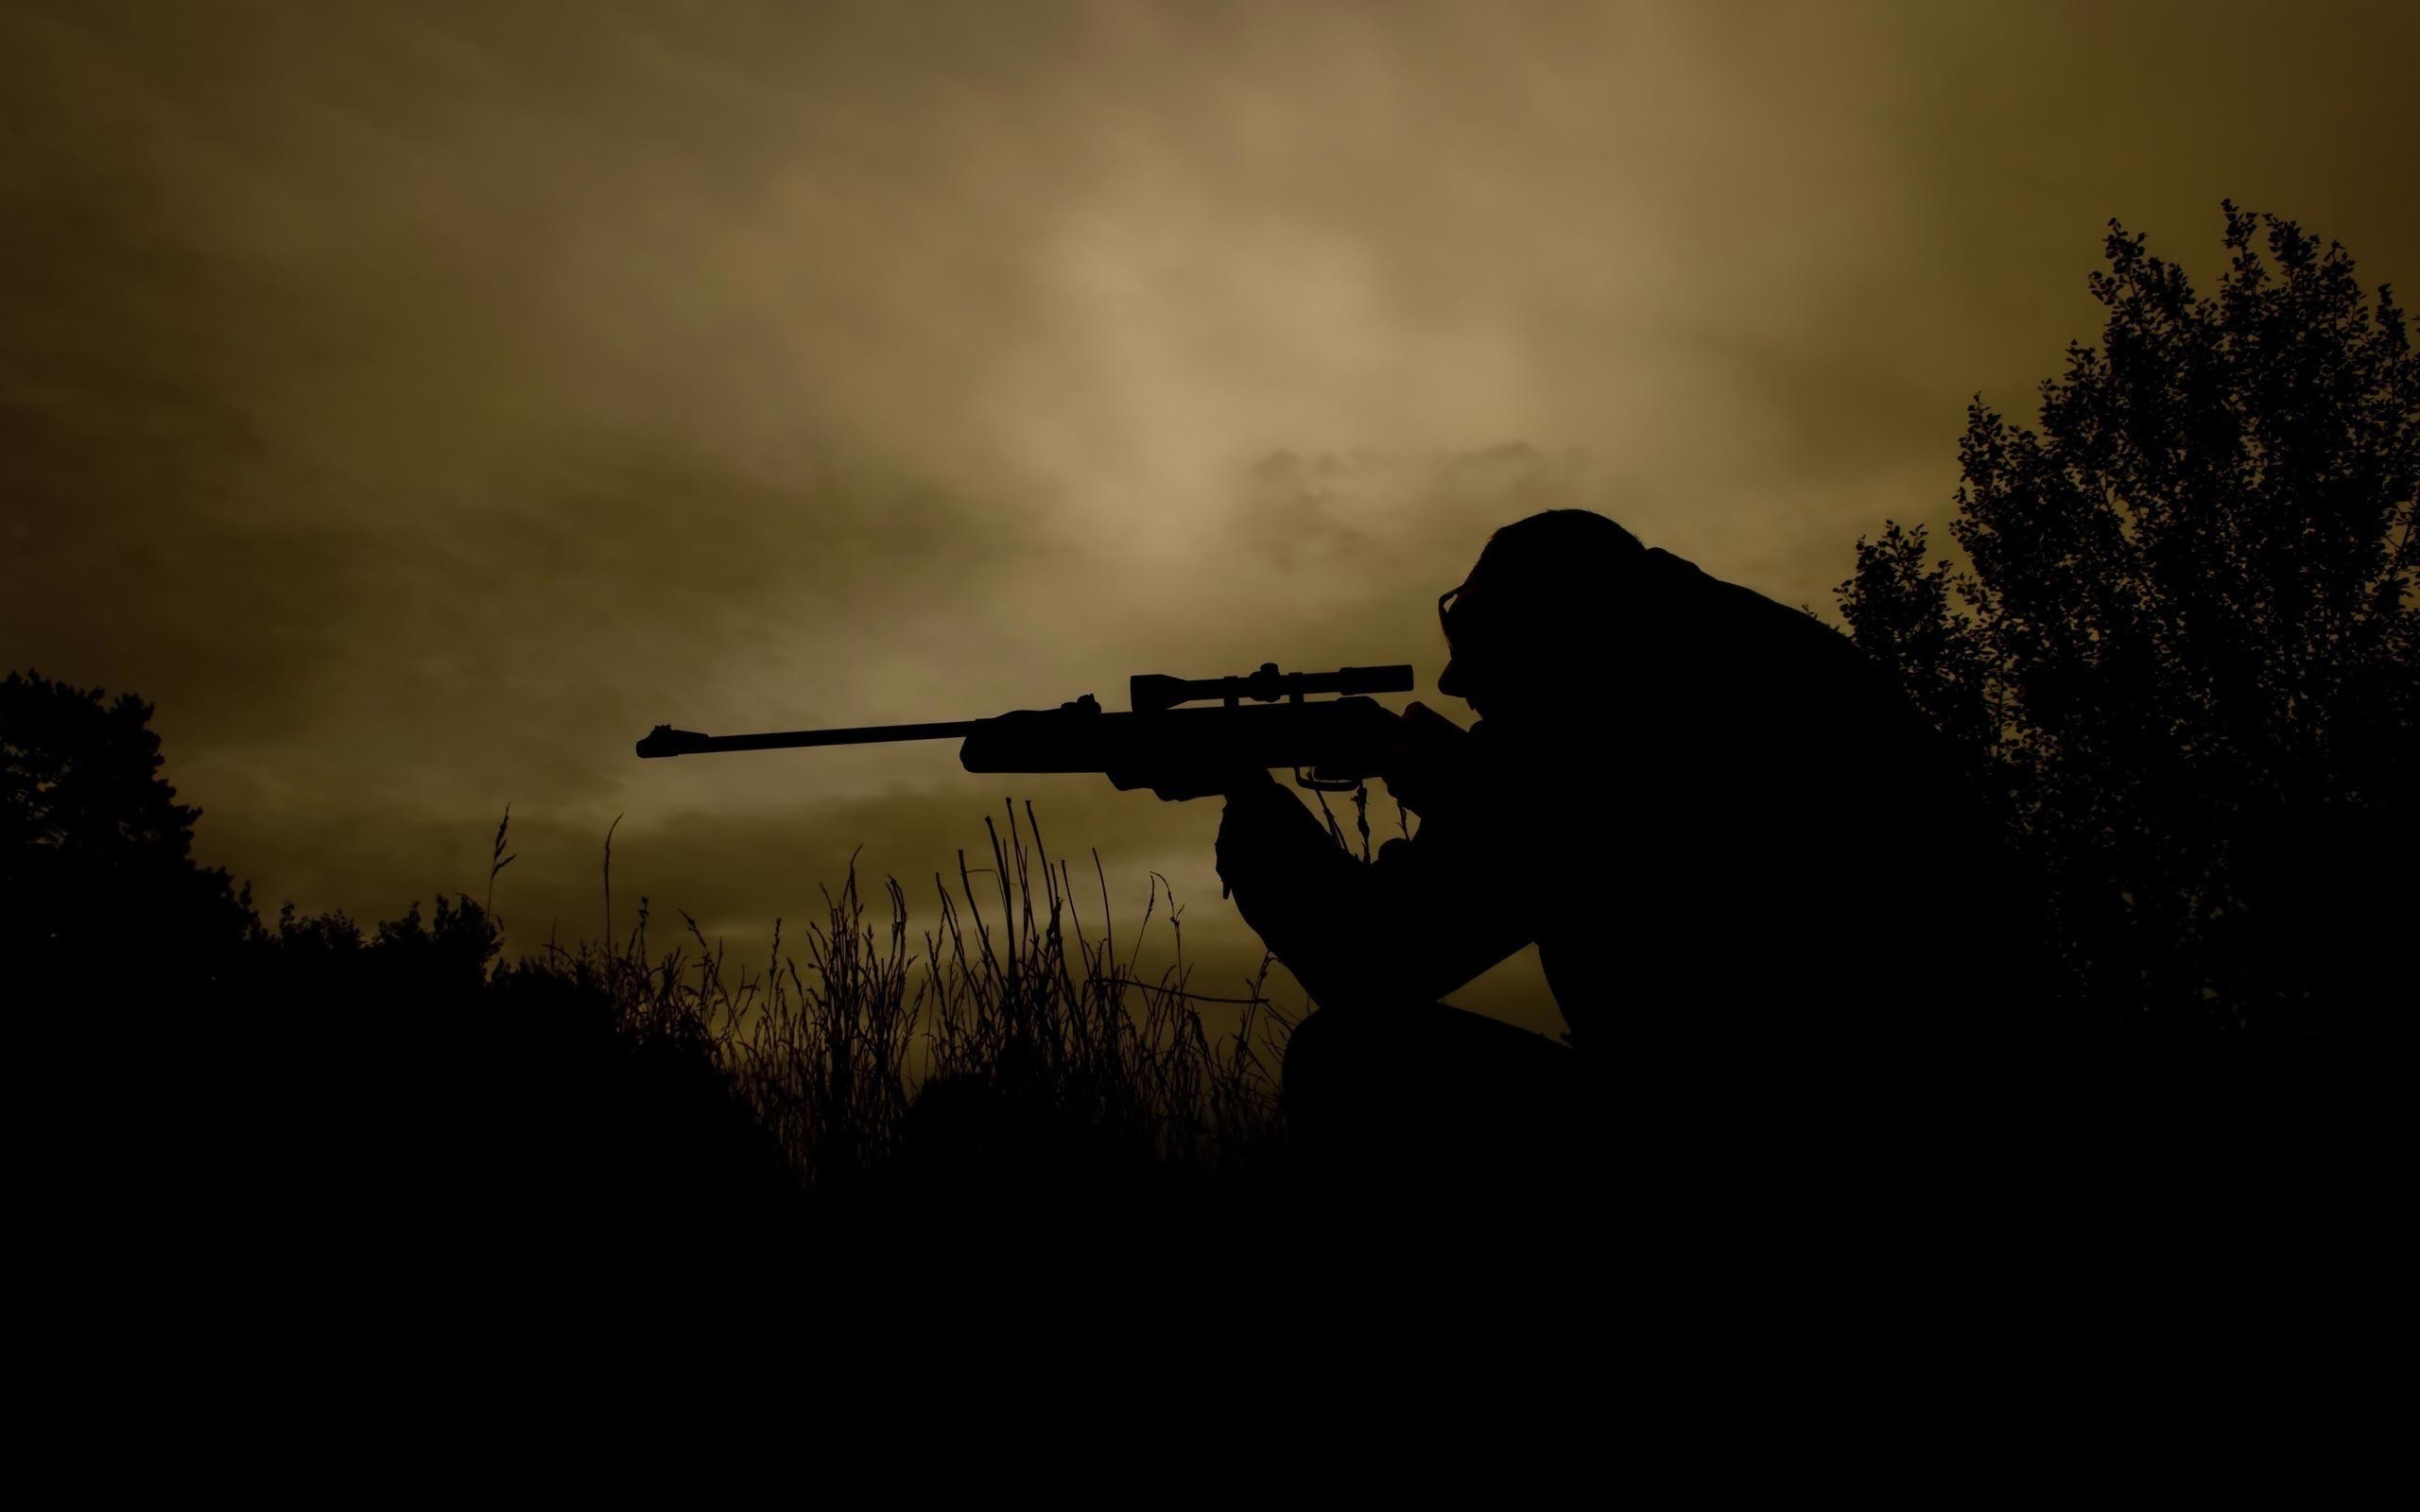 2560x1600 Computer Hunting Silhouette Wallpapers, Desktop Backgrounds px Id